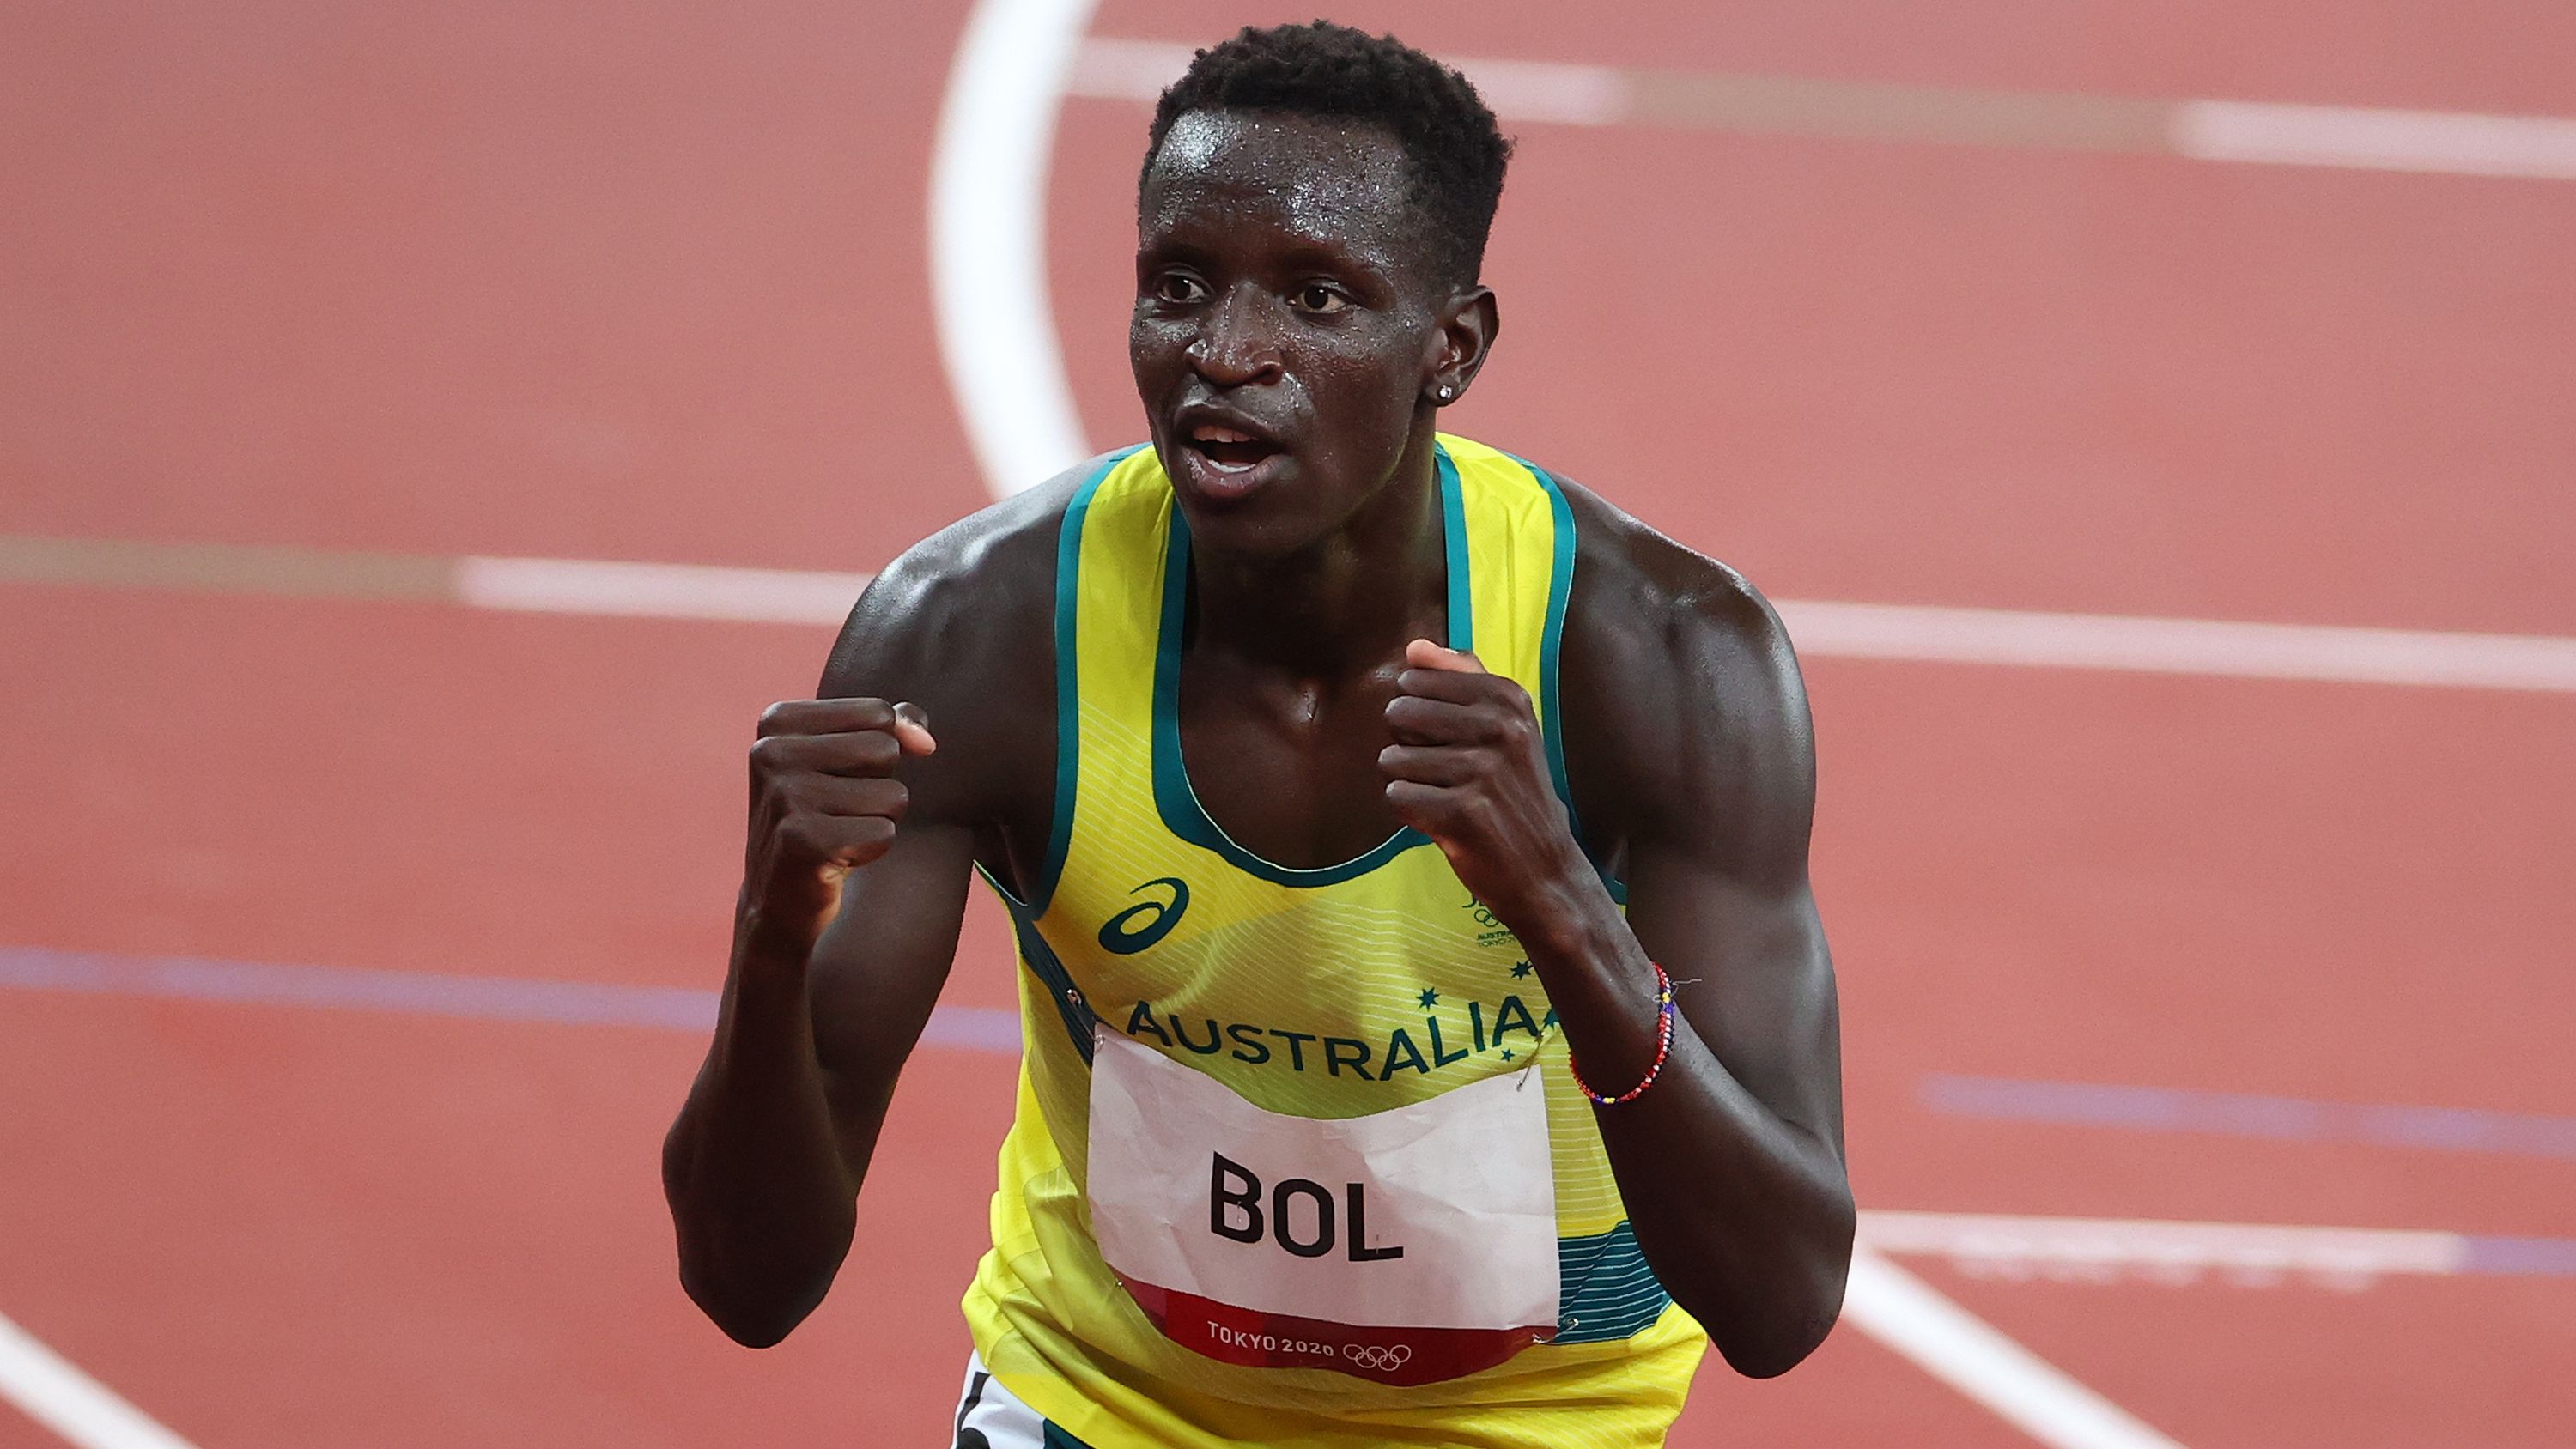 EXCLUSIVE: Why Peter Bol can blitz comeback from 'huge shock' of drug test controversy